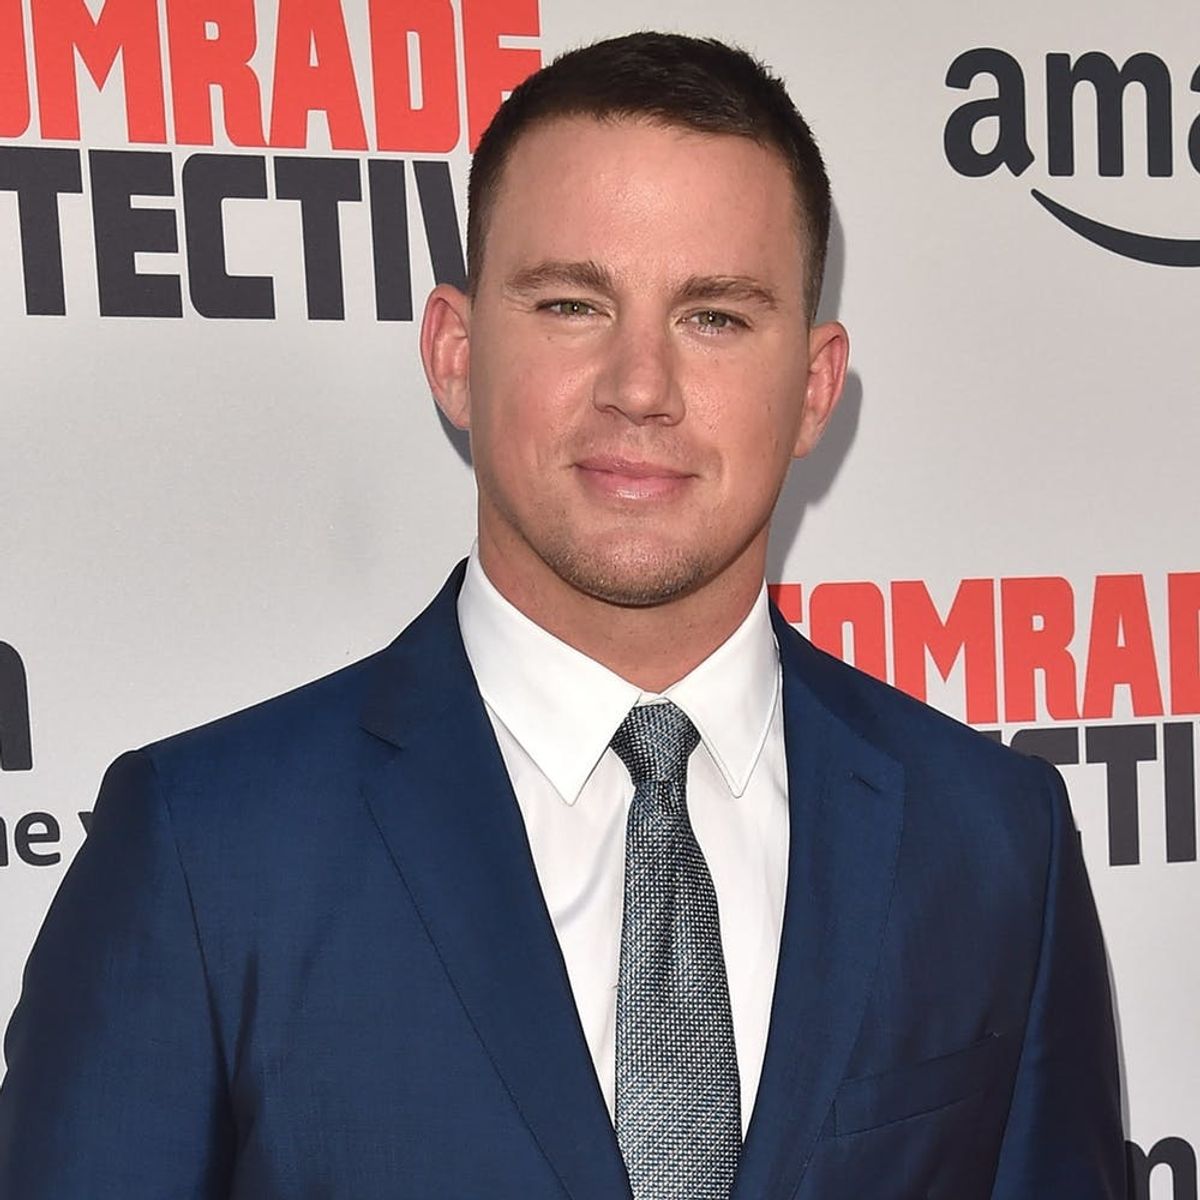 Channing Tatum Sings “Let It Go” in a Princess Costume on a Dare from Halle Berry